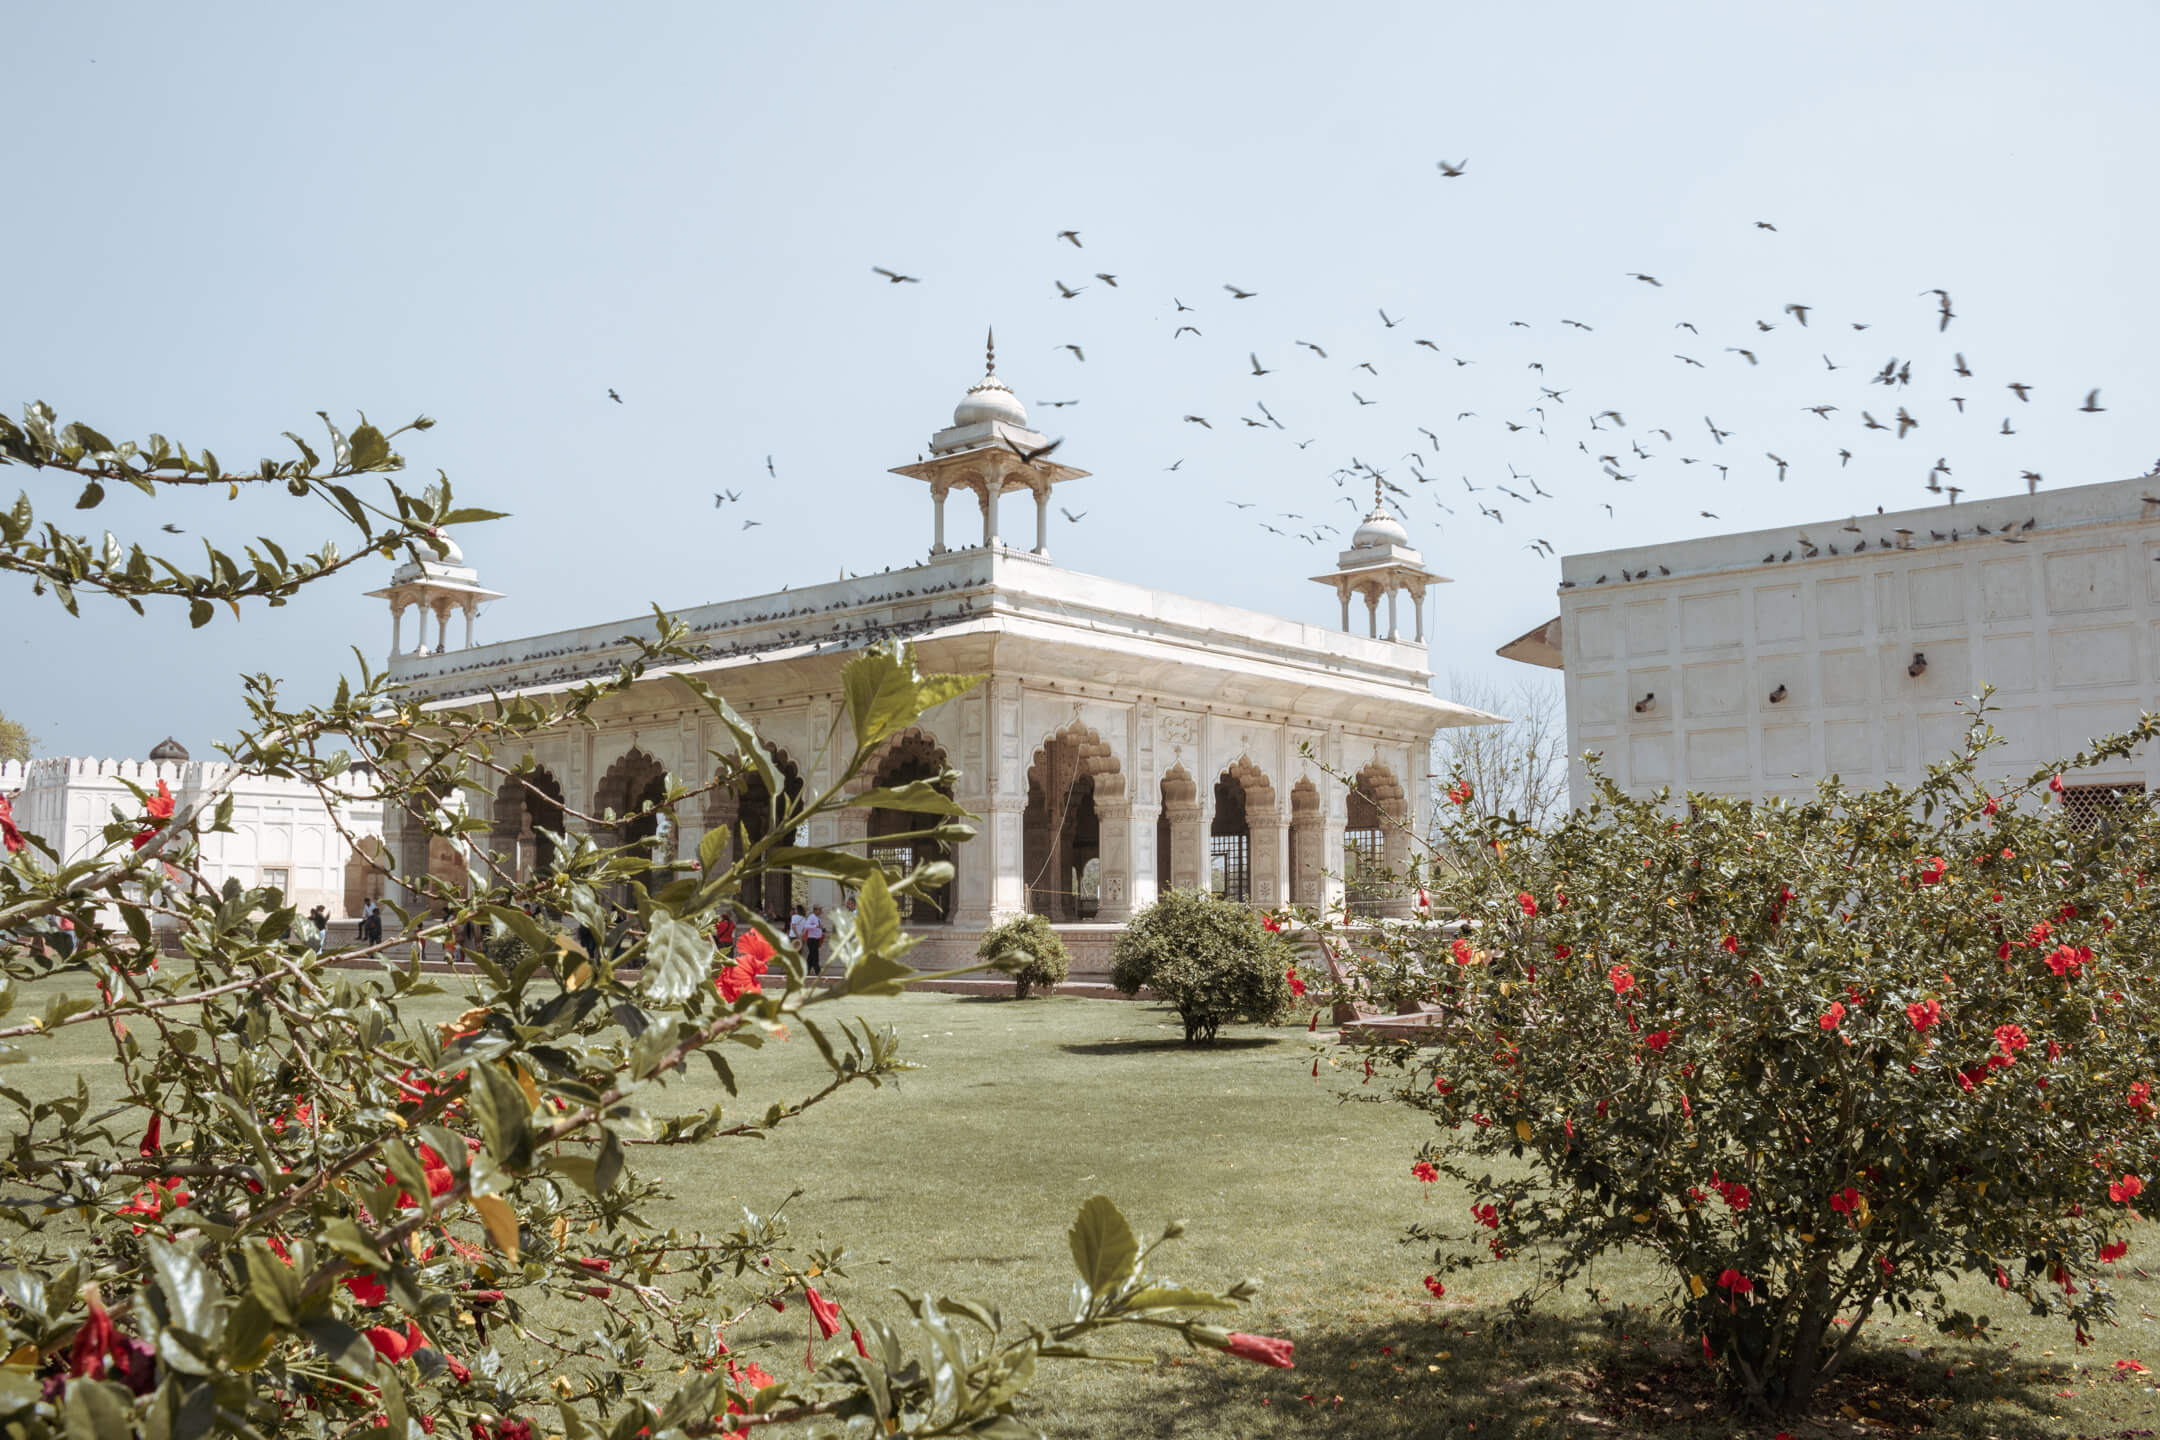 The Red Fort gardens in India